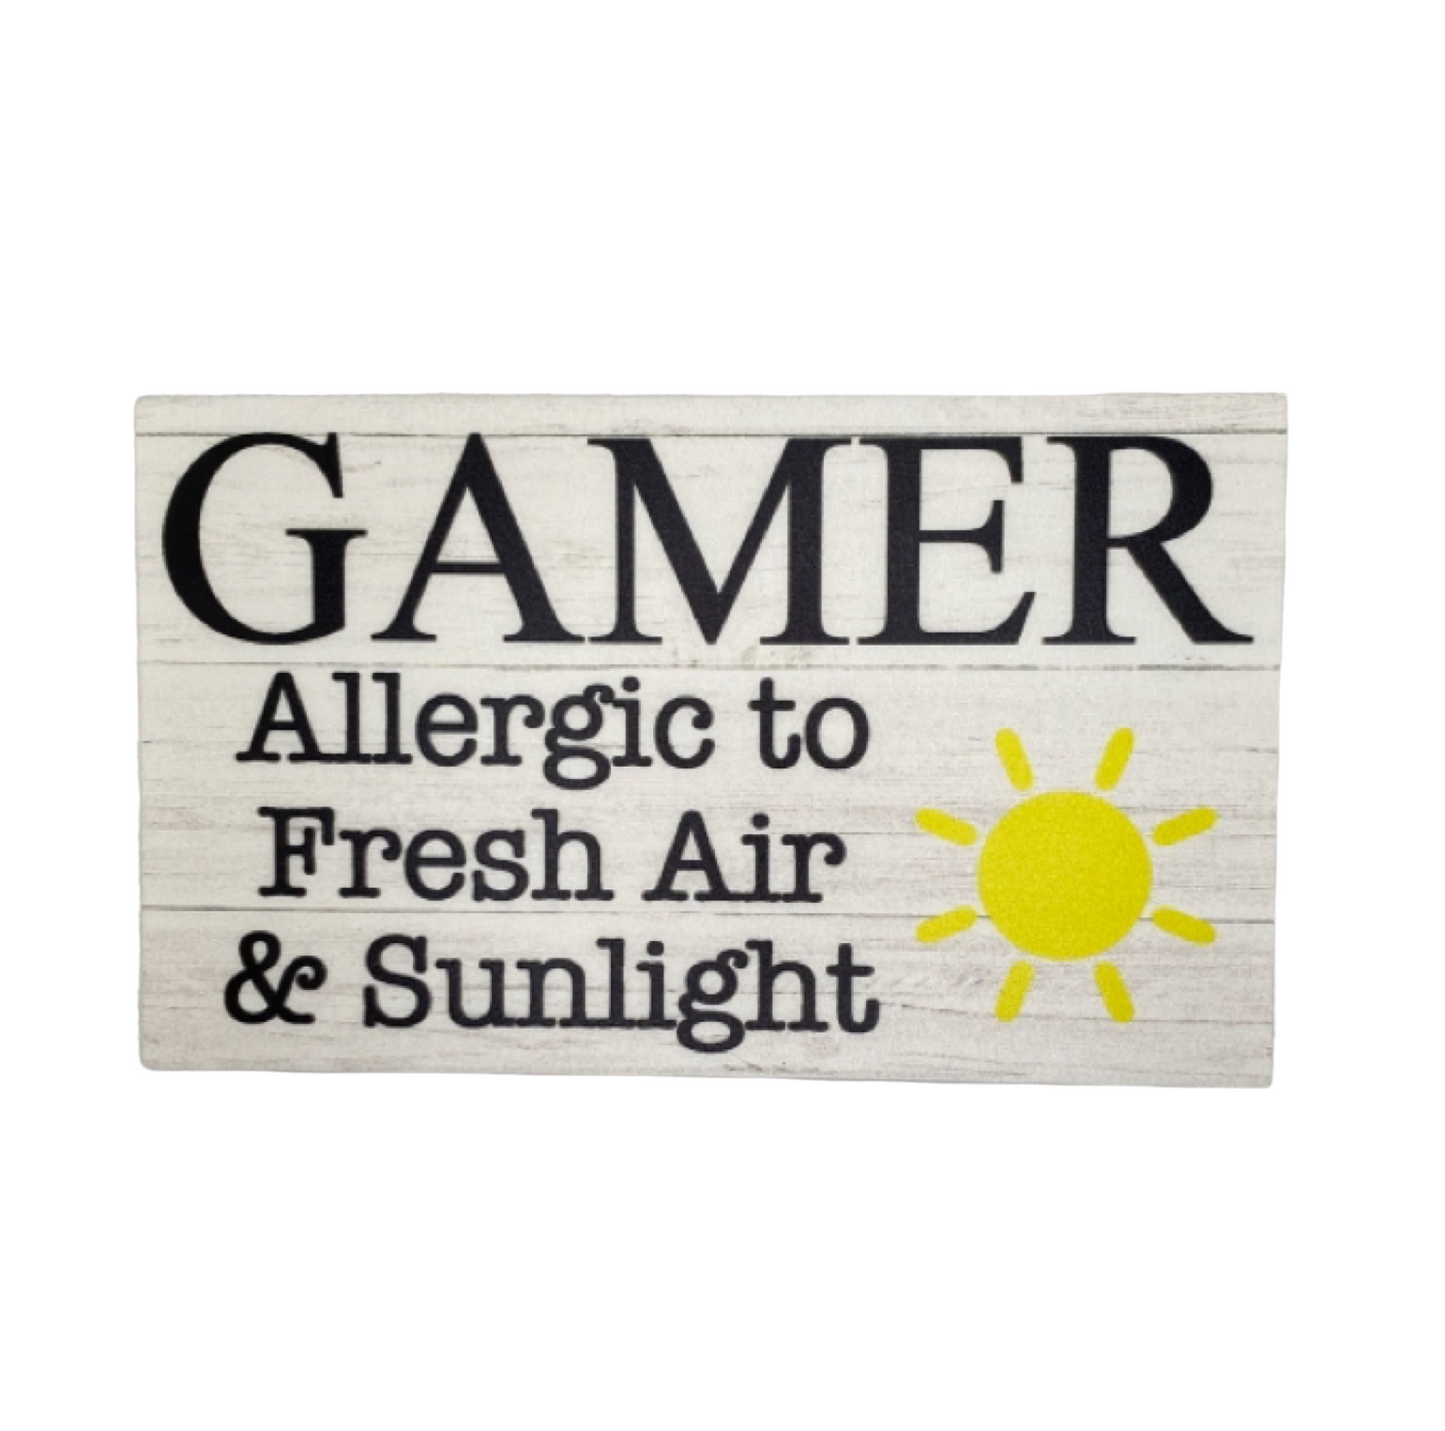 Gamer Allergic Fresh Air and Sunlight Funny Sign - The Renmy Store Homewares & Gifts 